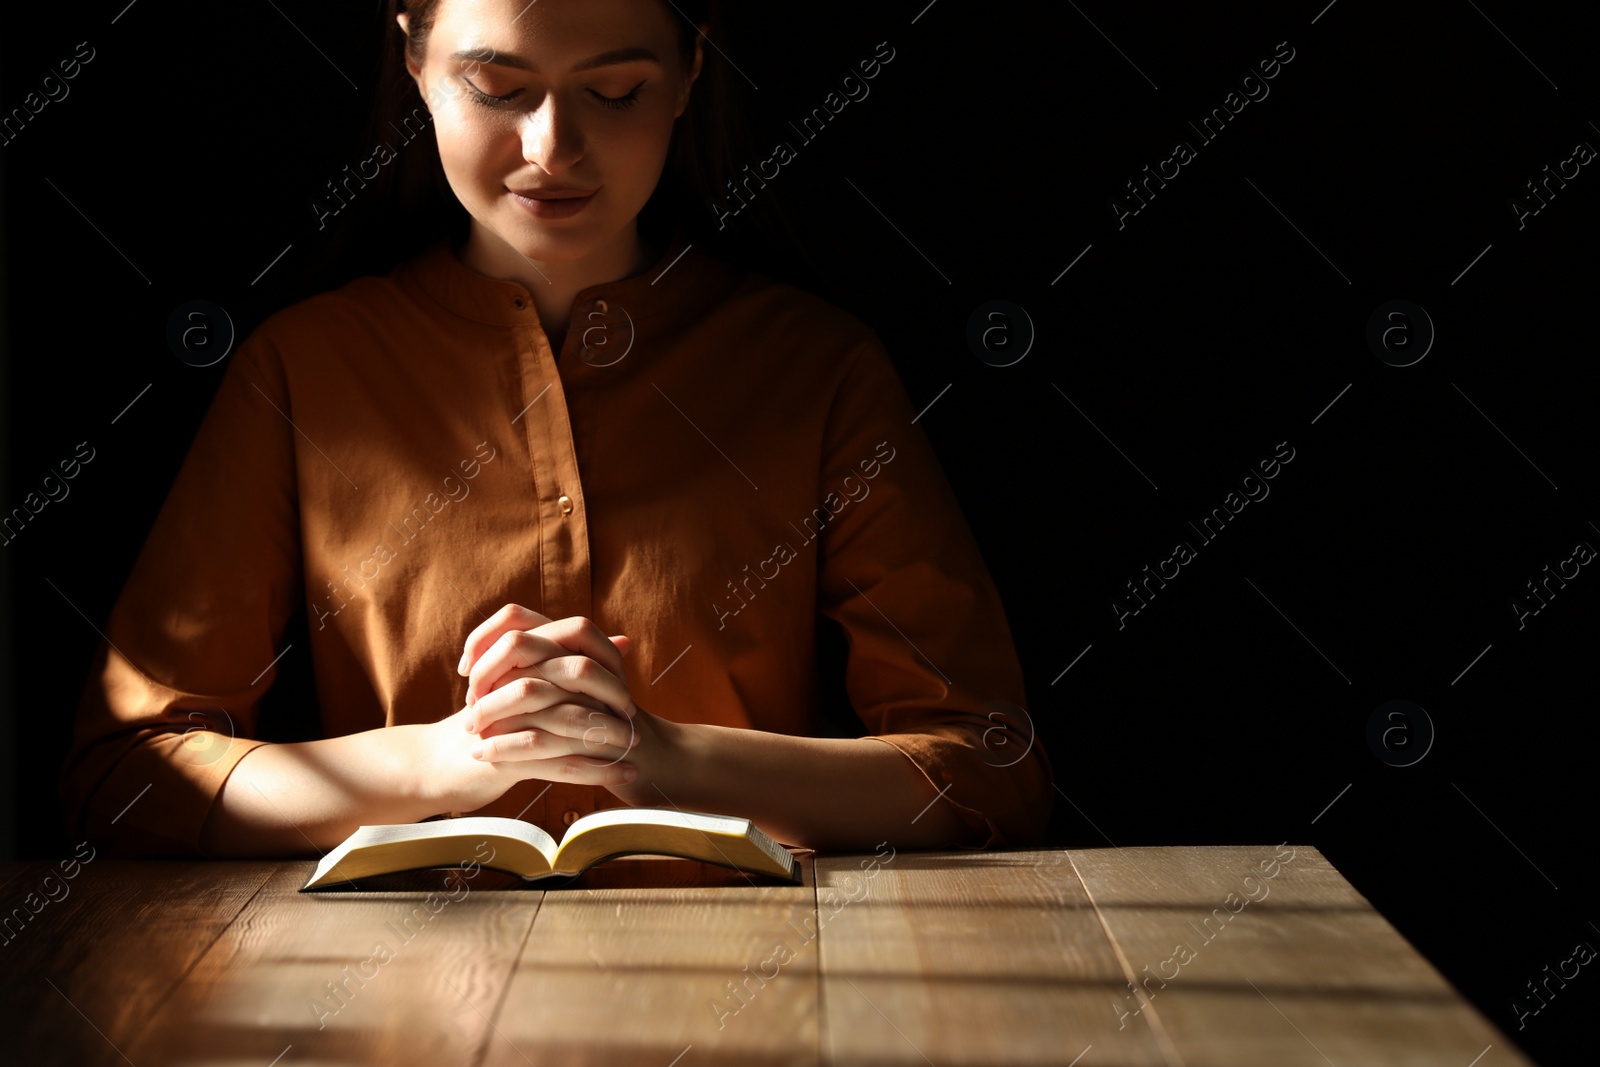 Photo of Religious young woman praying over Bible at wooden table indoors